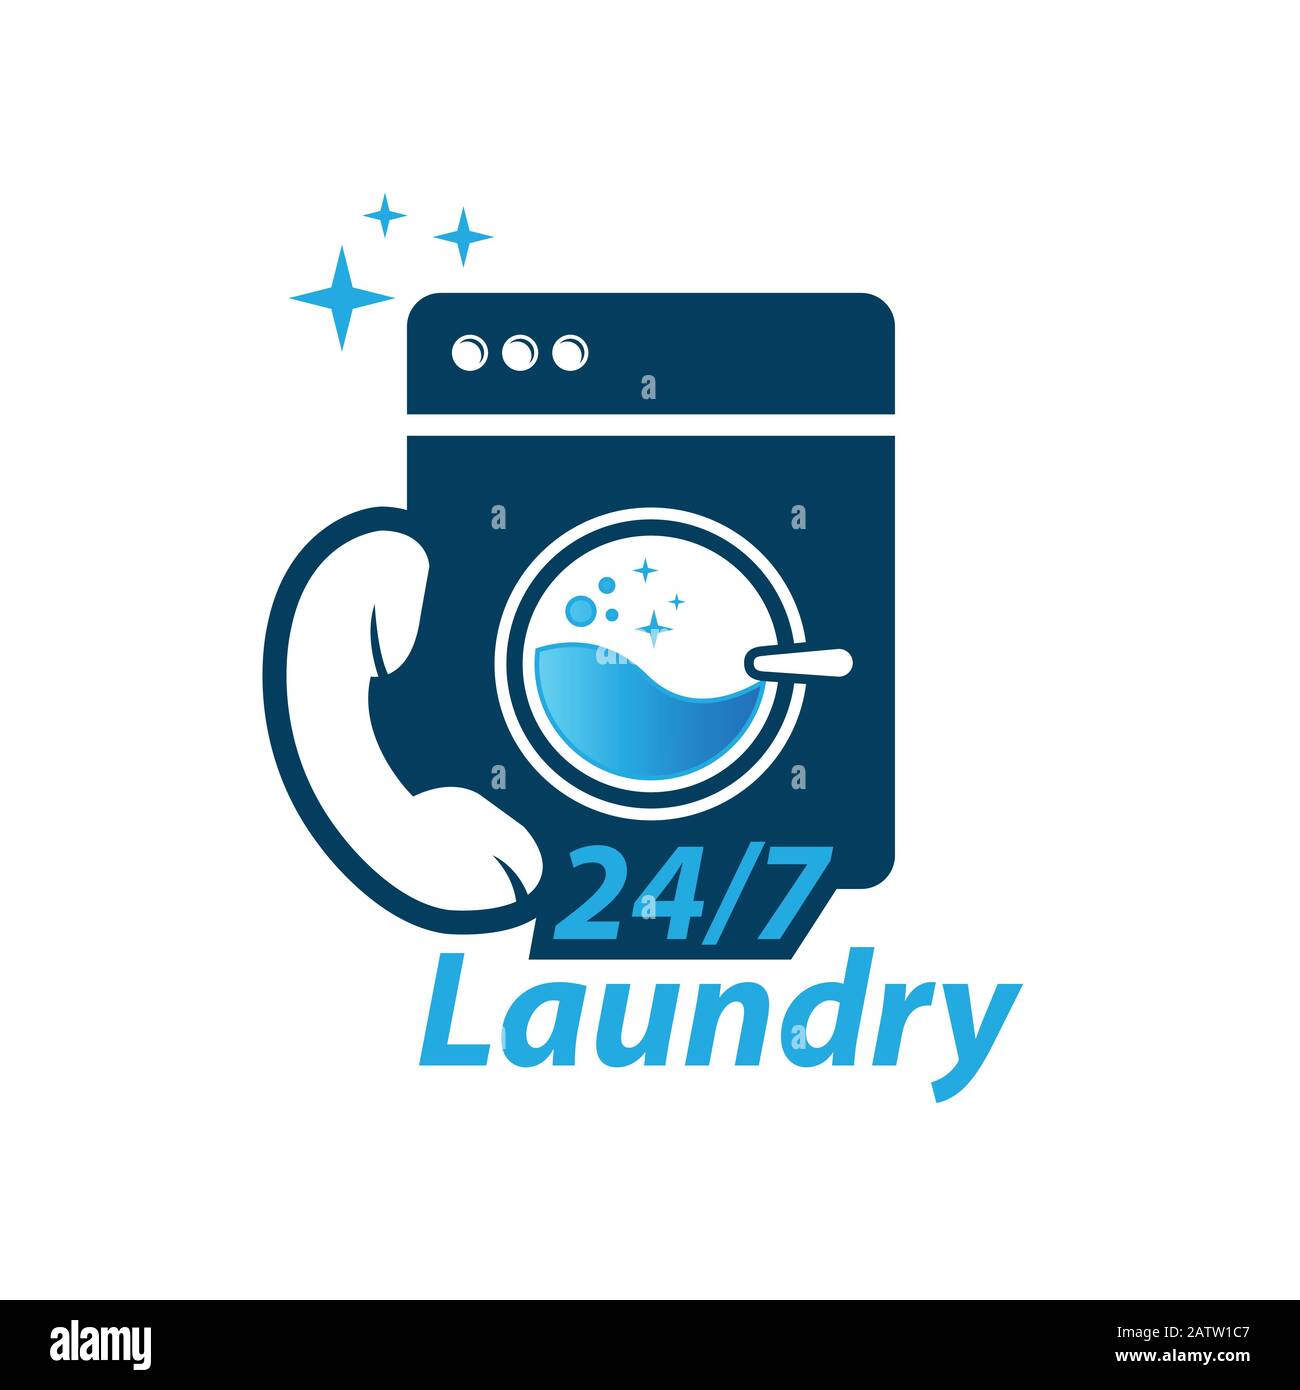 Washing machine icon in flat style isolated on black background. Domestic equipment logo silhouette. Abstract sign symbol pictogram. Vector illustrati Stock Vector